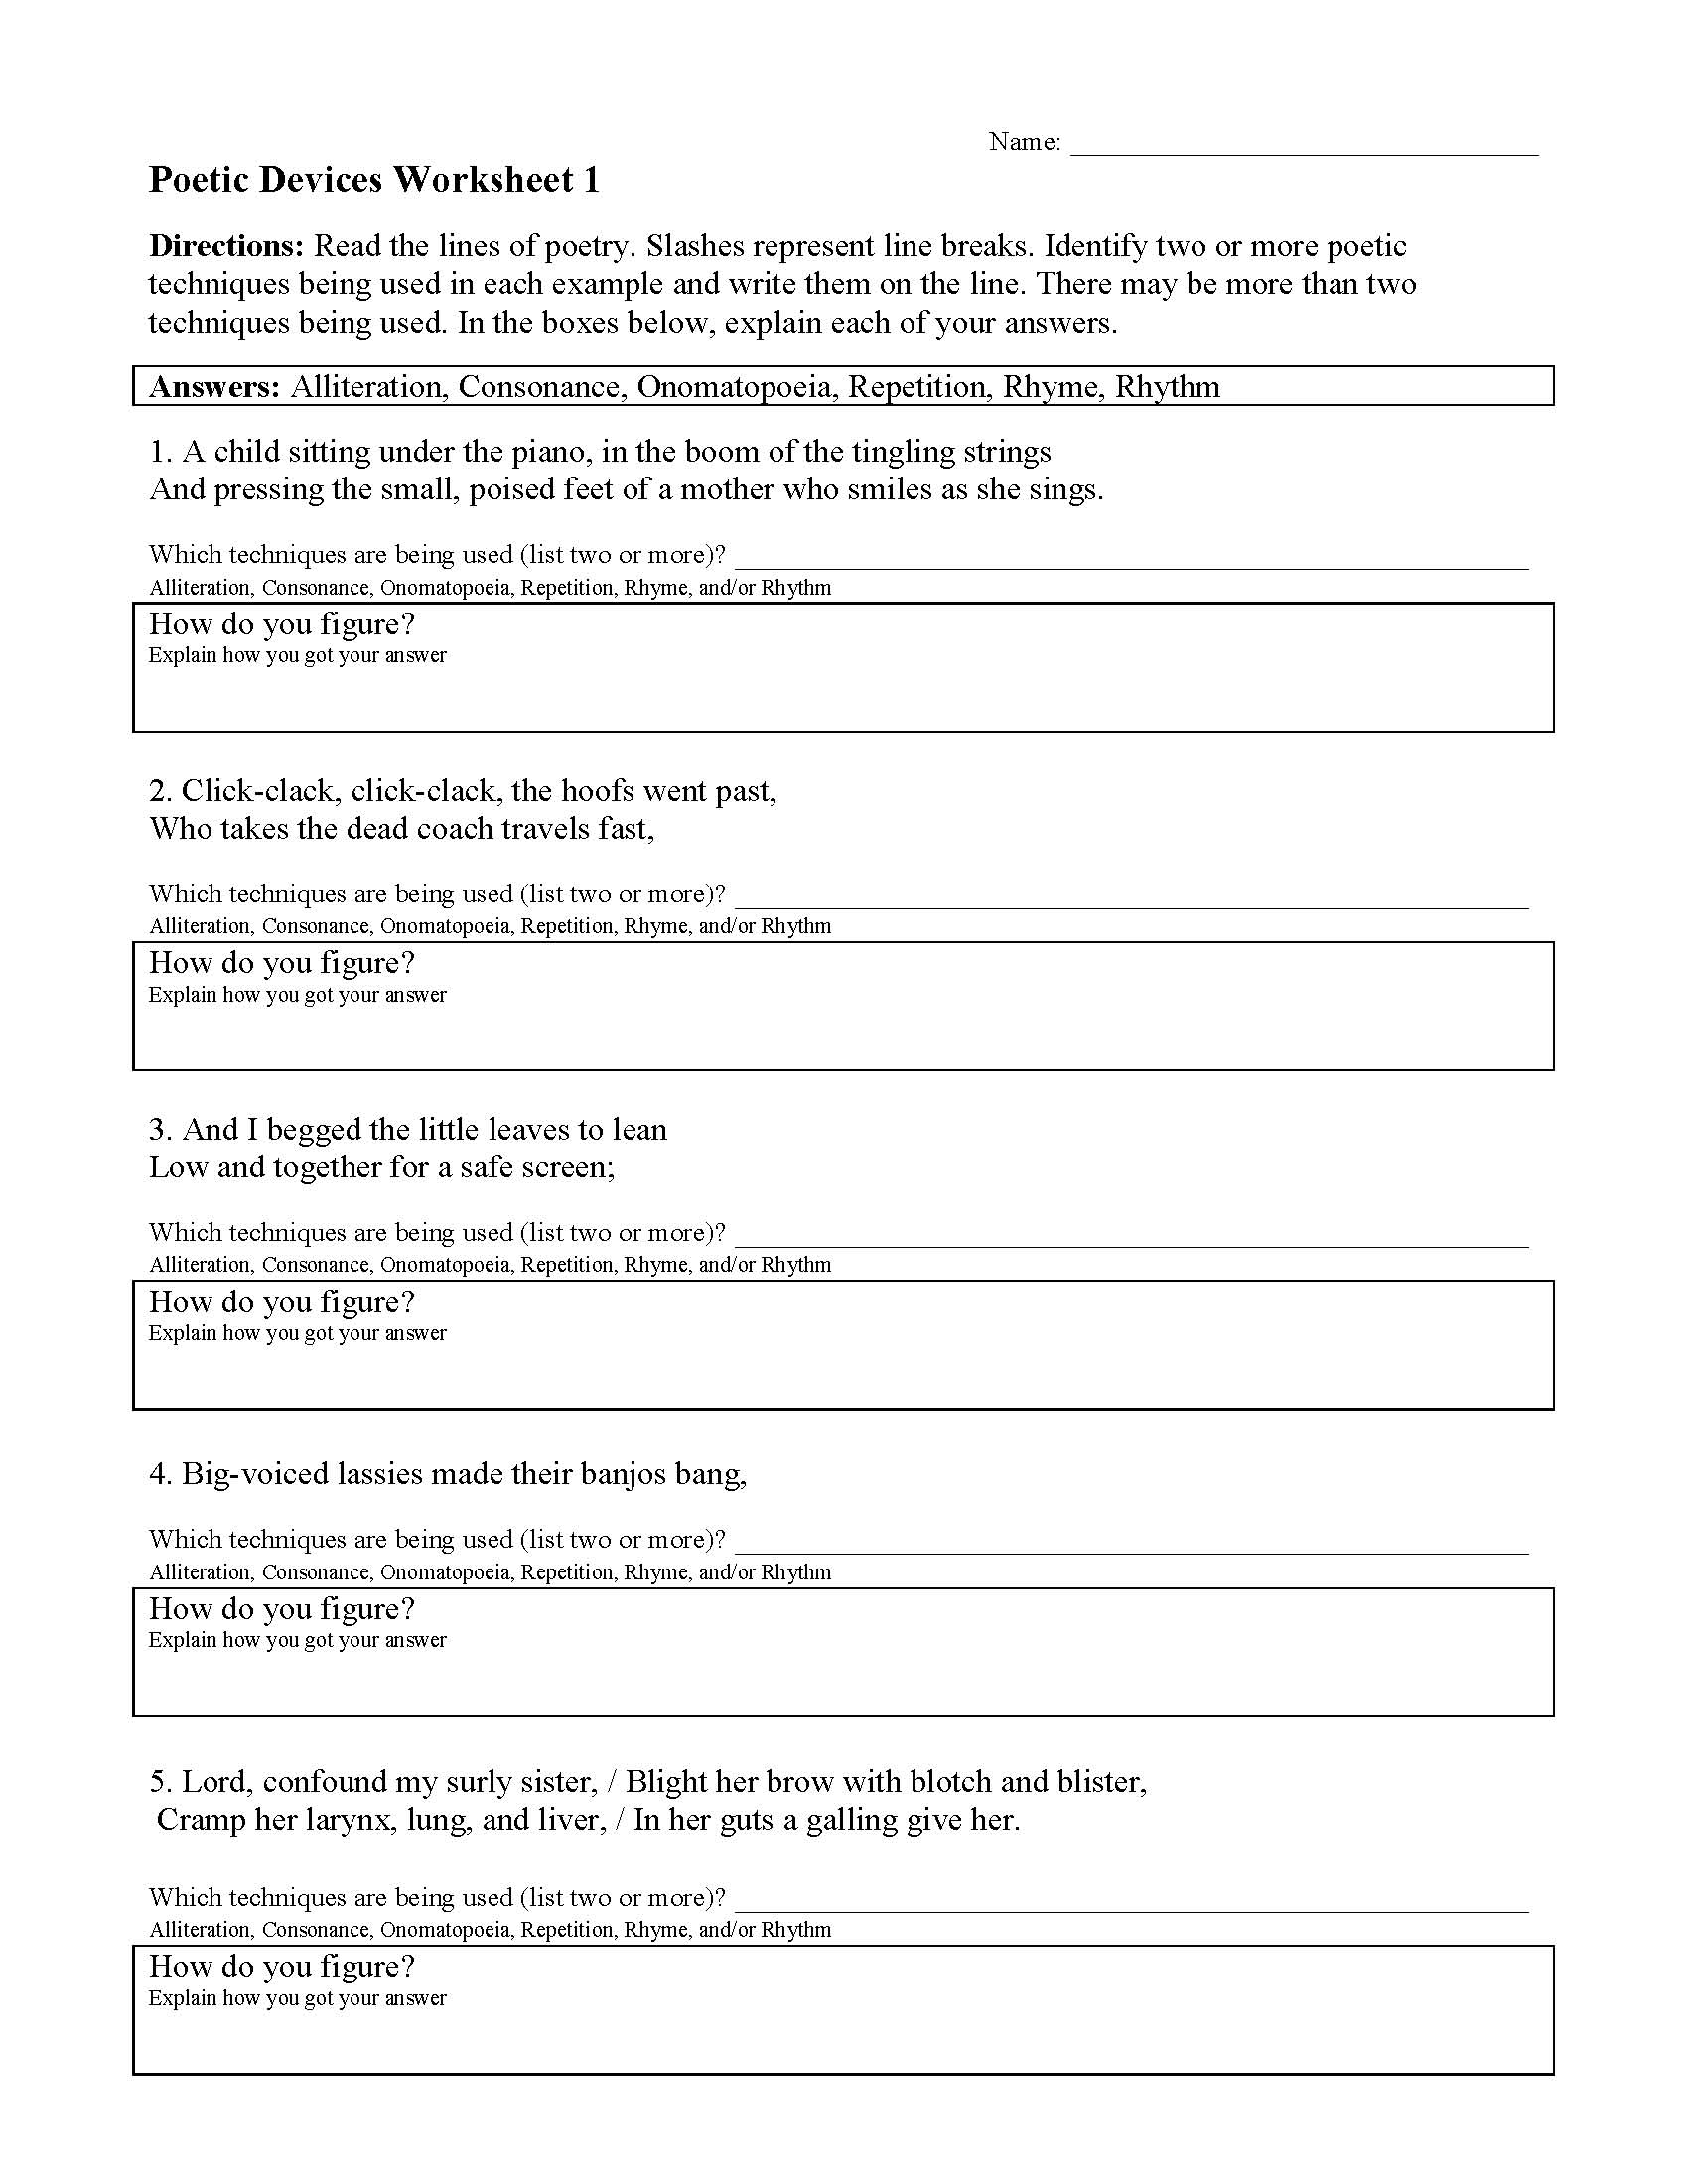 Poetic Devices Worksheet 20  Reading Activity In Sound Devices In Poetry Worksheet